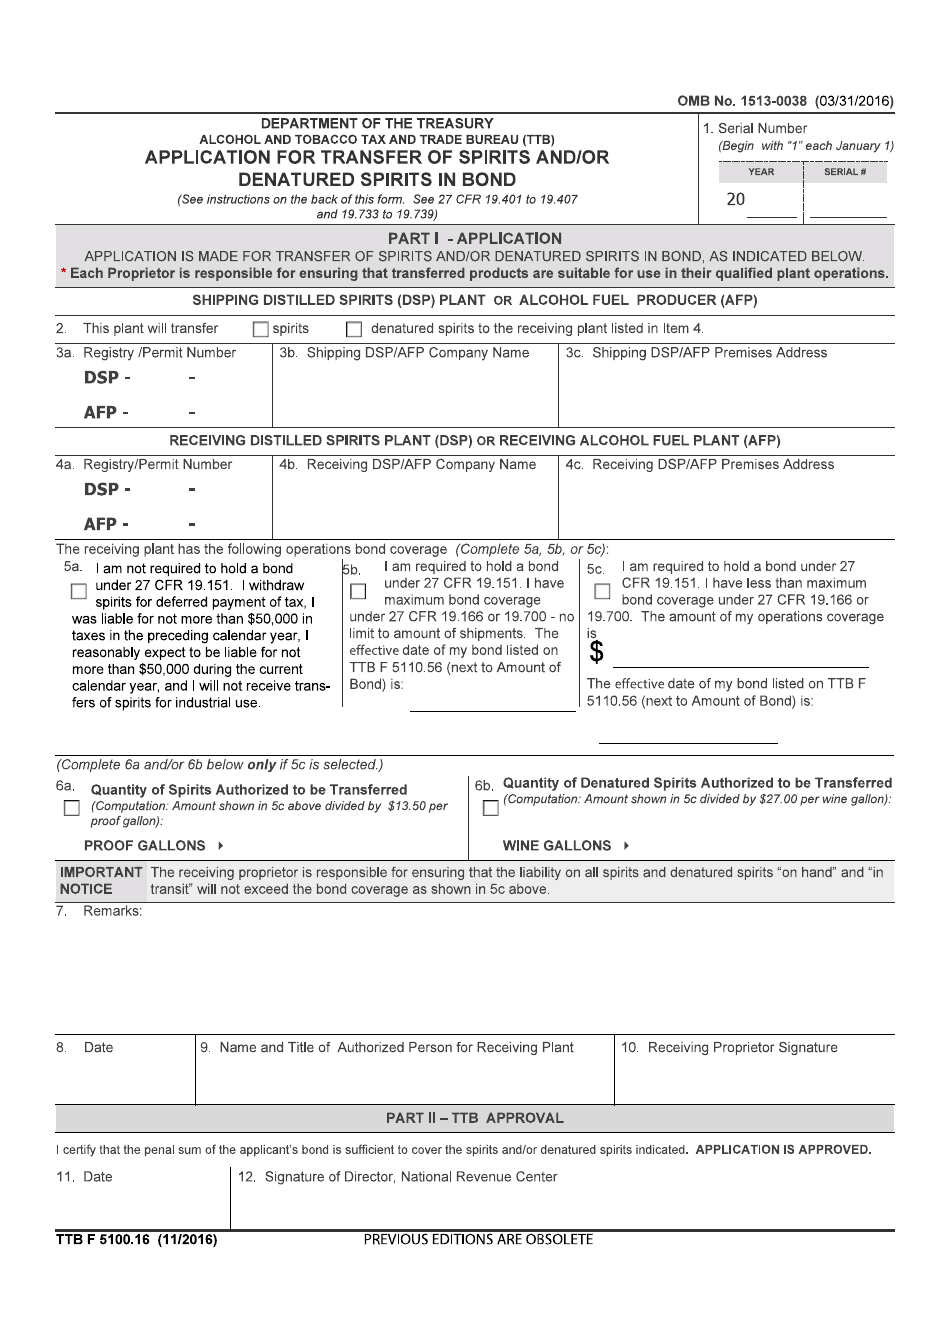 TTB Form 5100.16 Application for Transfer of Spirits and / or Denatured Spirits in Bond, Page 1